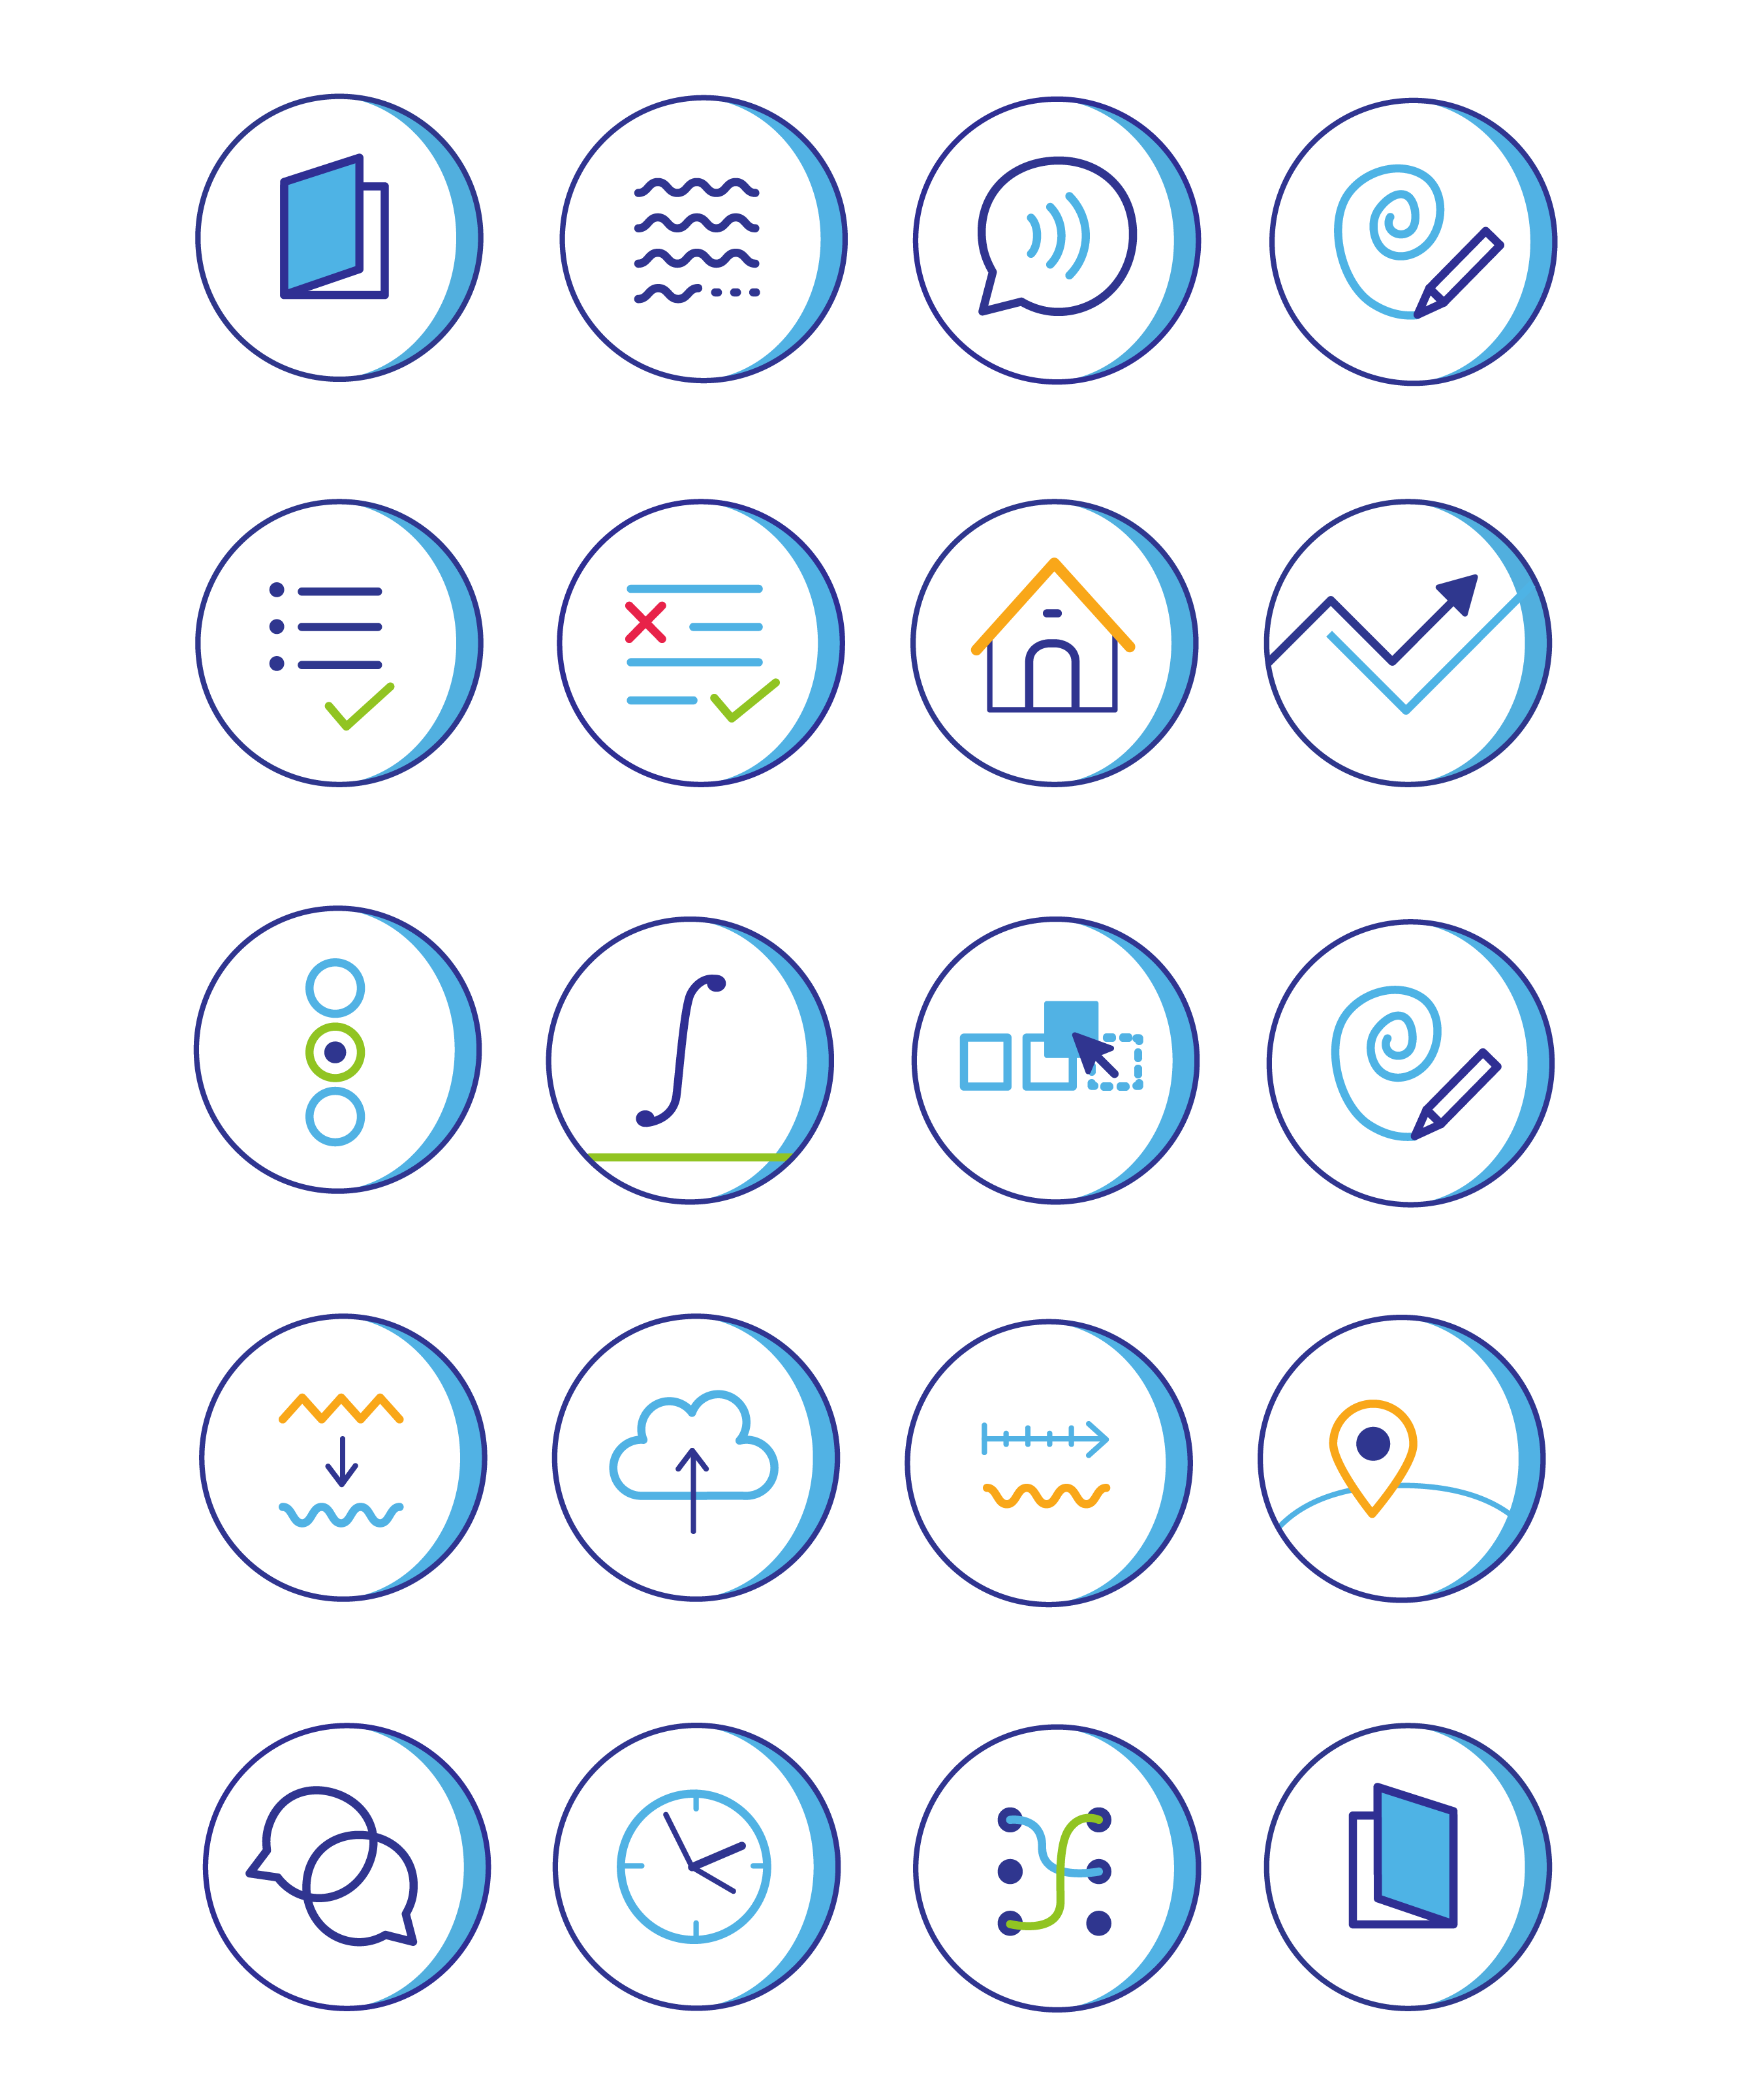 icon set - task and exercise icons